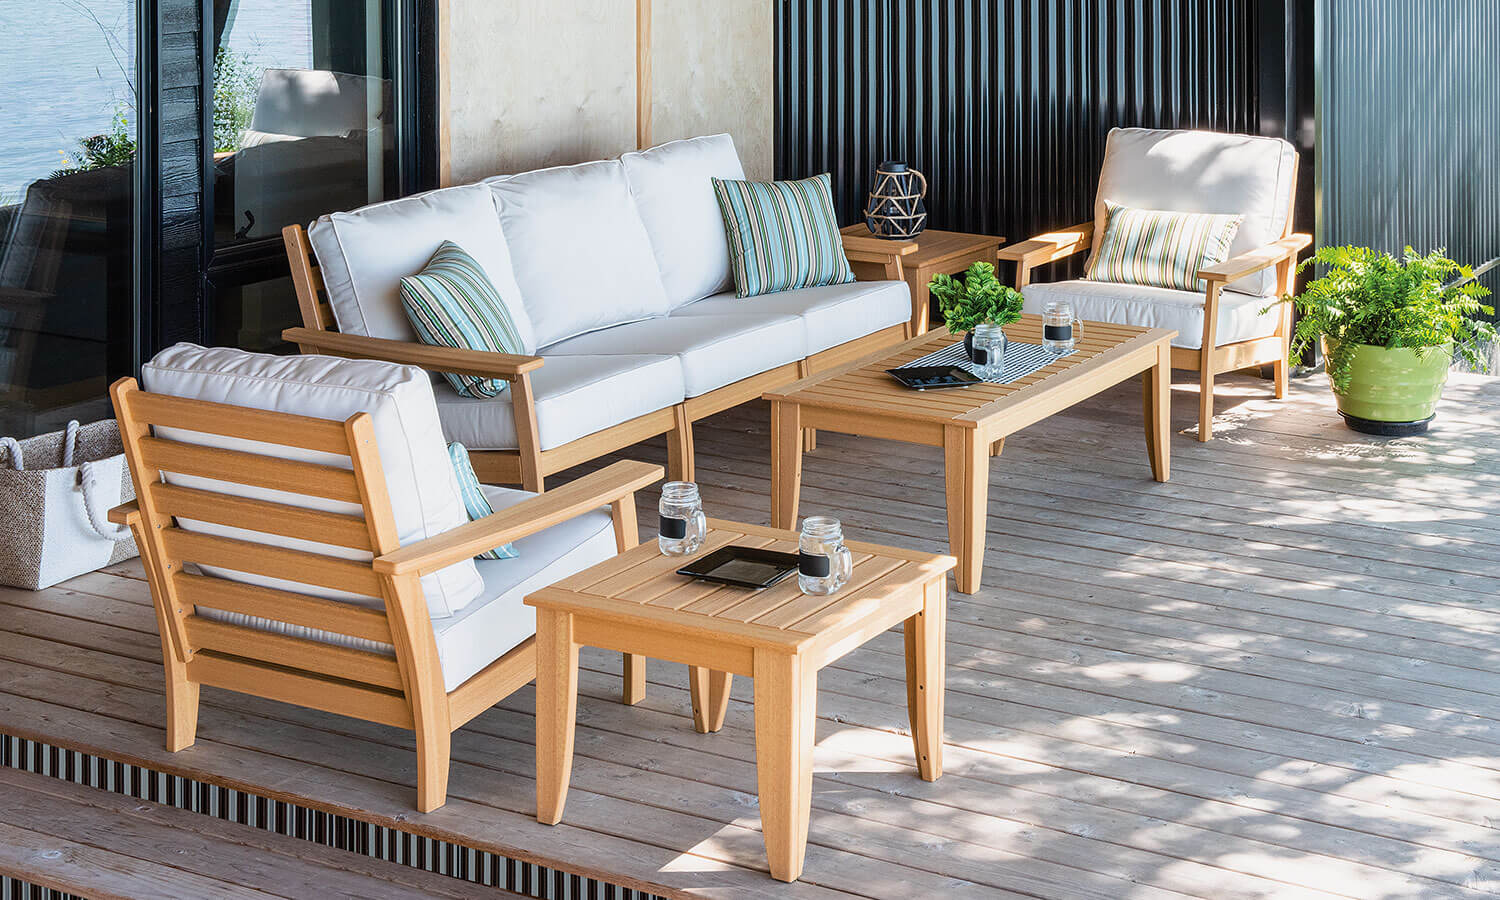 EC Woods Calistoga Outdoor Poly Furniture Set Shown in Natural Teak with Canvas Cushions